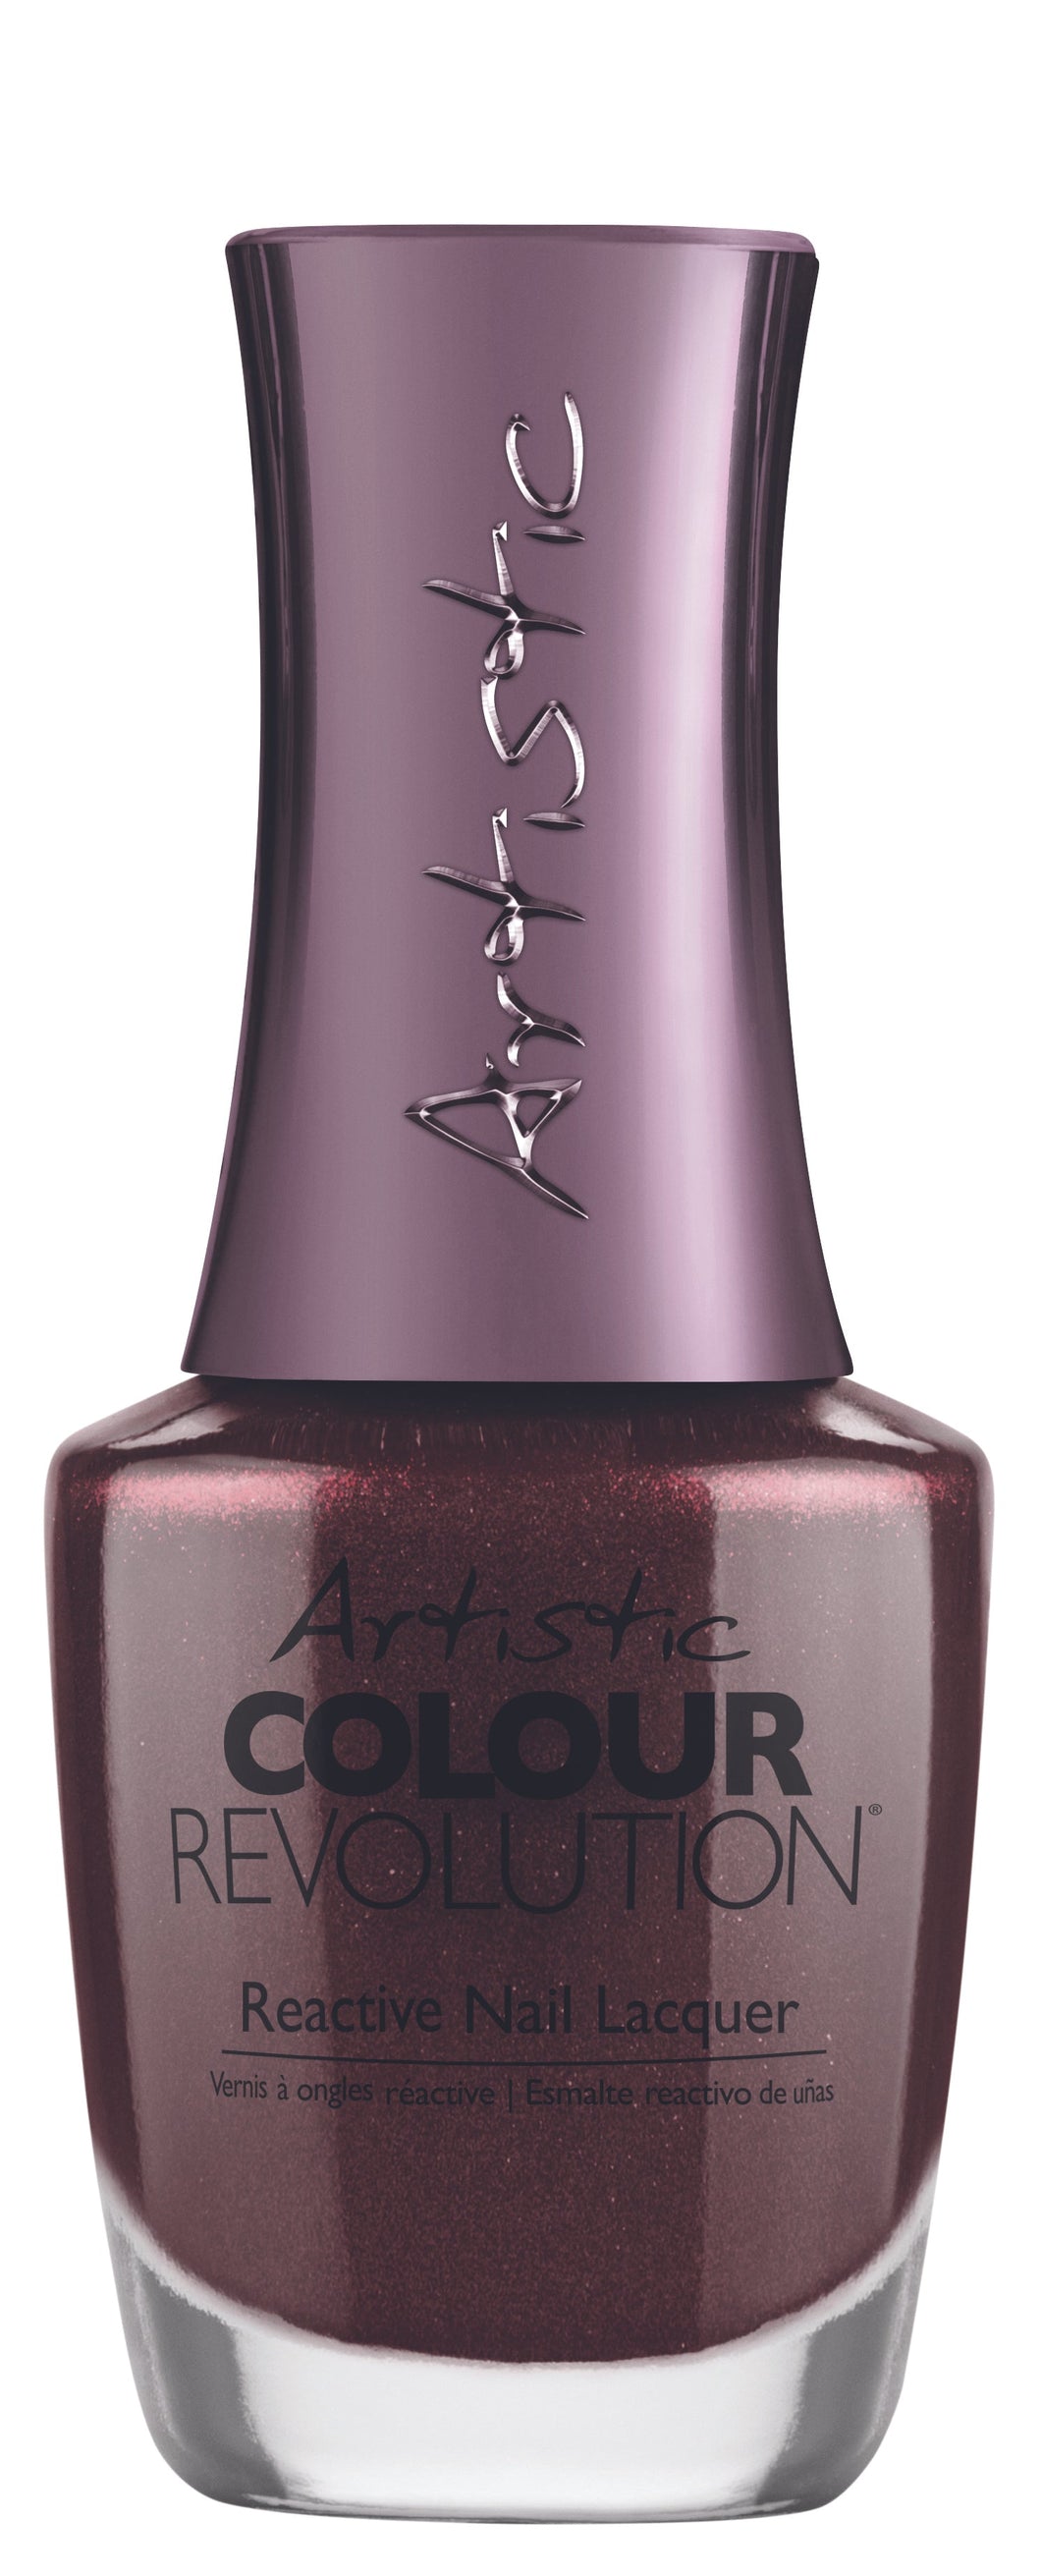 OUTSIDE THE LINES - DEEP BURGUNDY PEARL - LACQUER